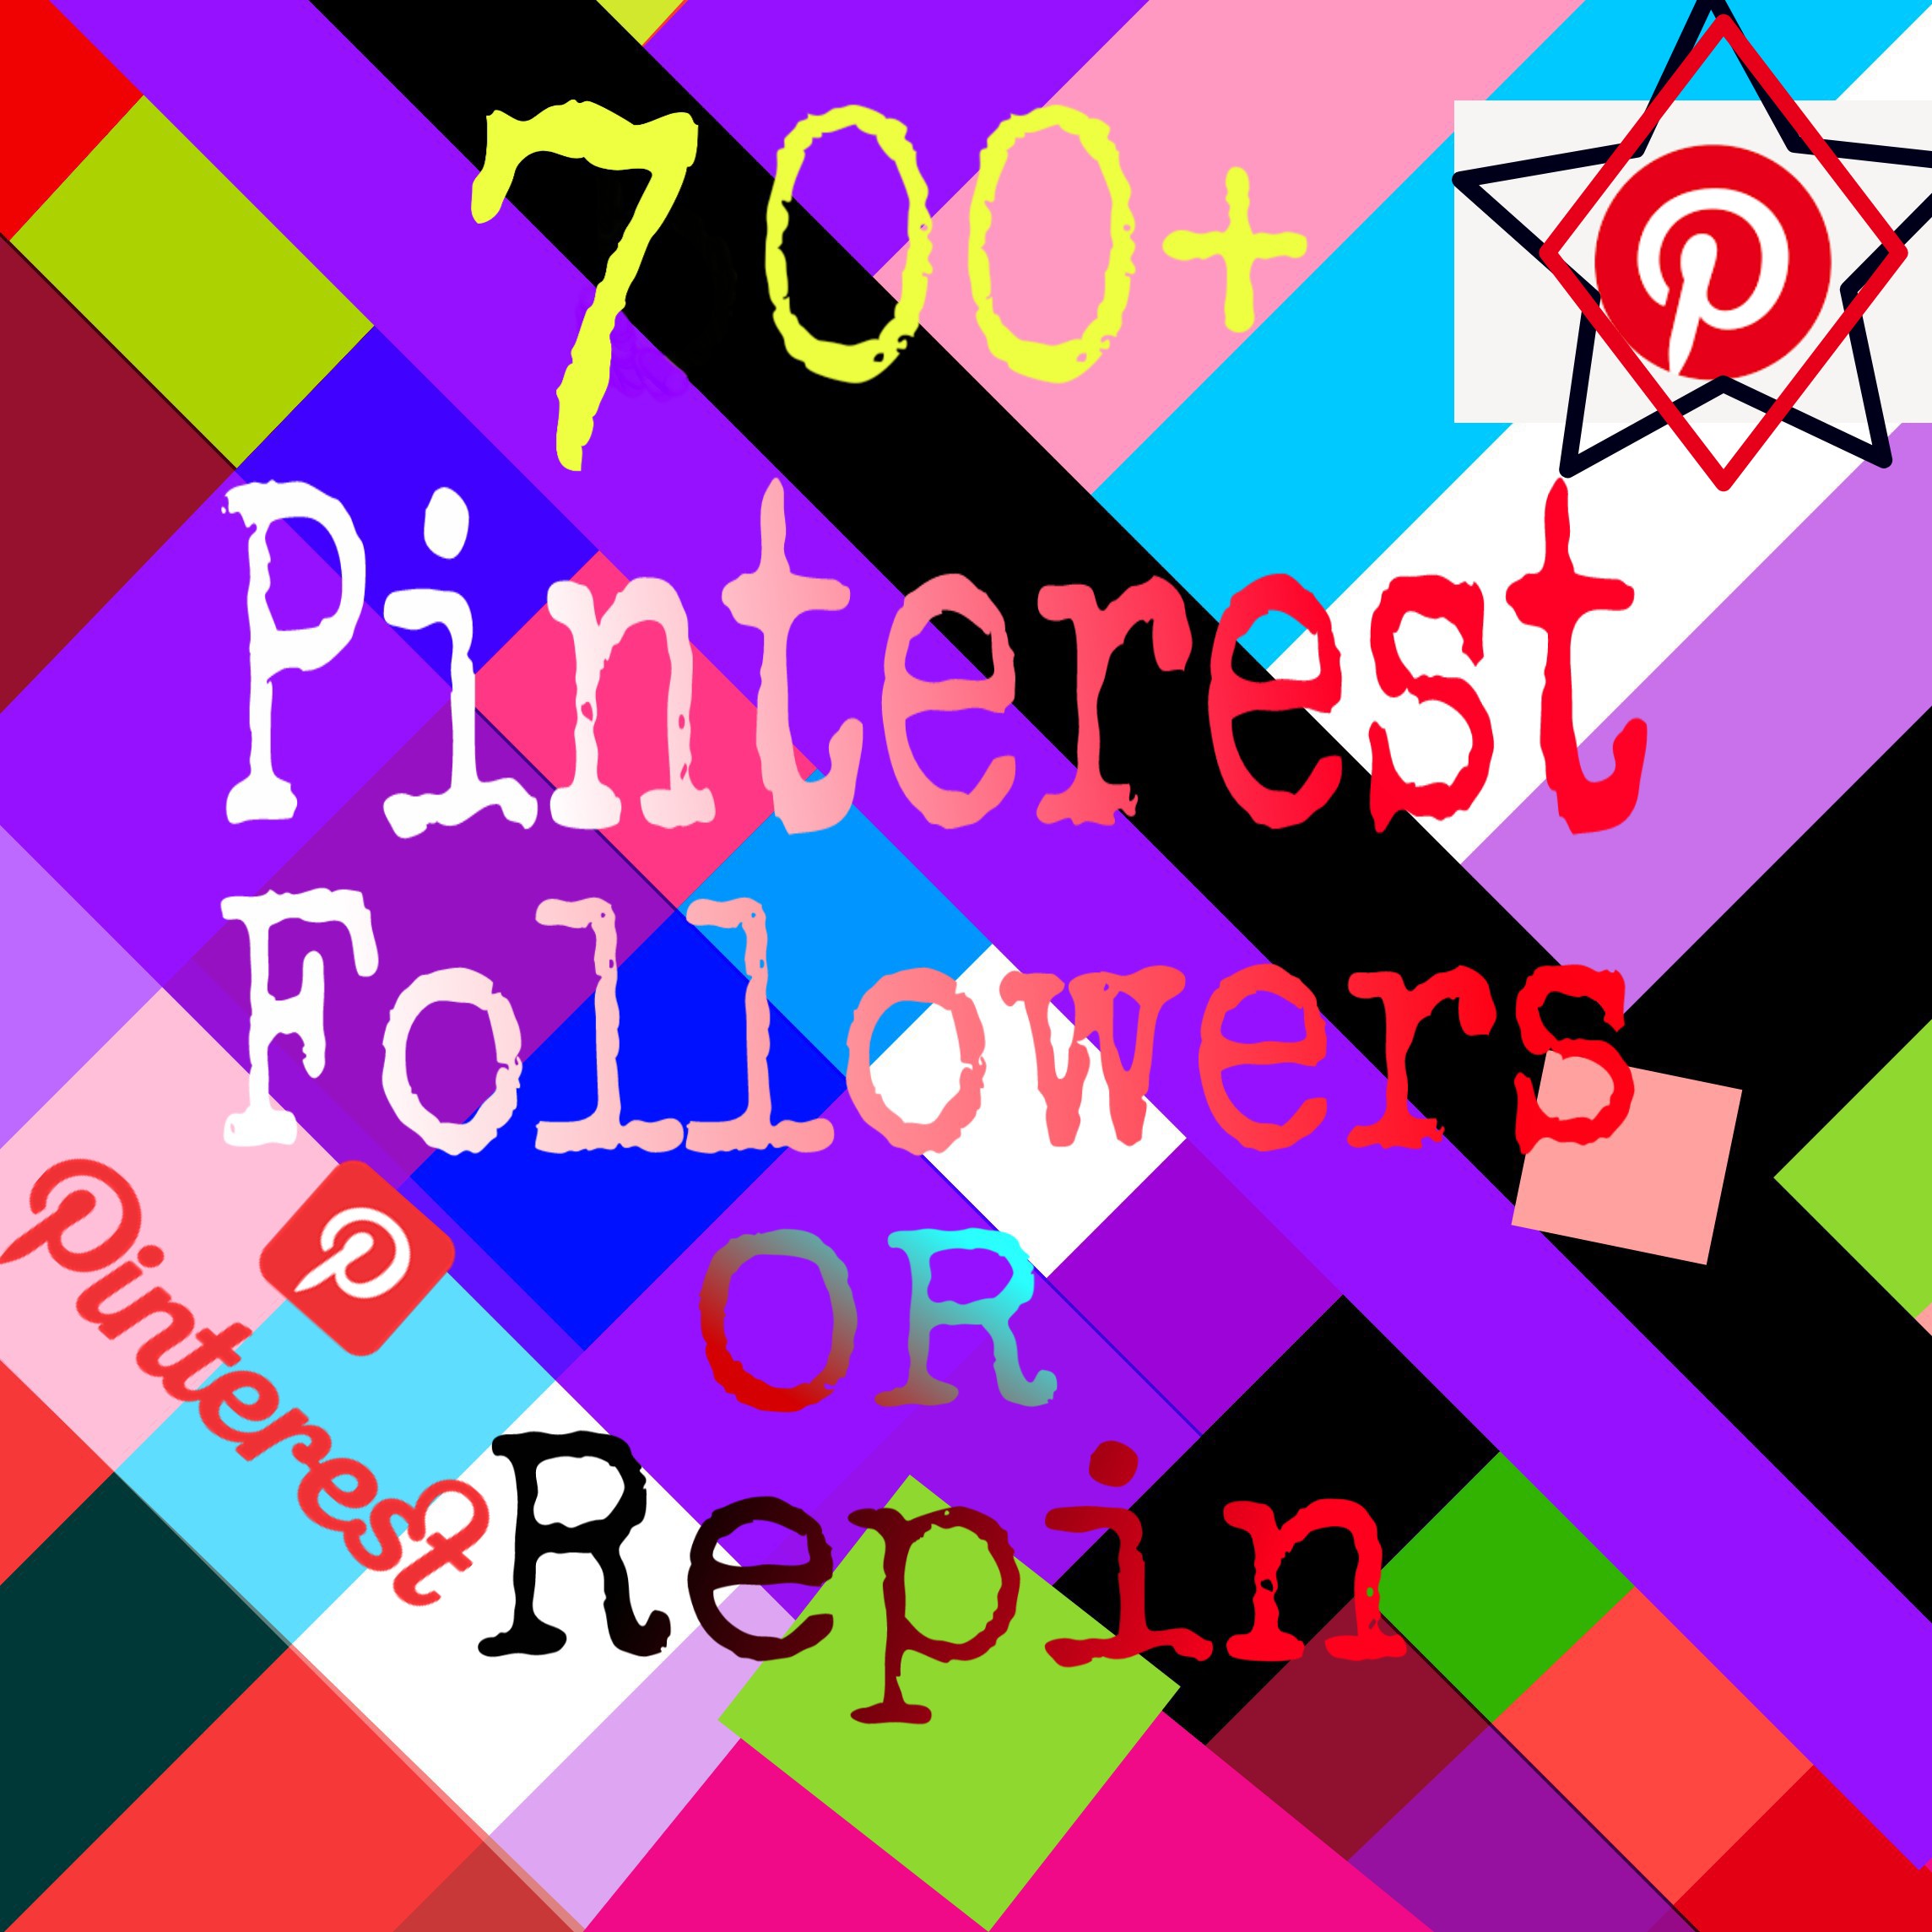 I will give you 700+ naturally grow world wide pinterest promotion fast delivery for $7